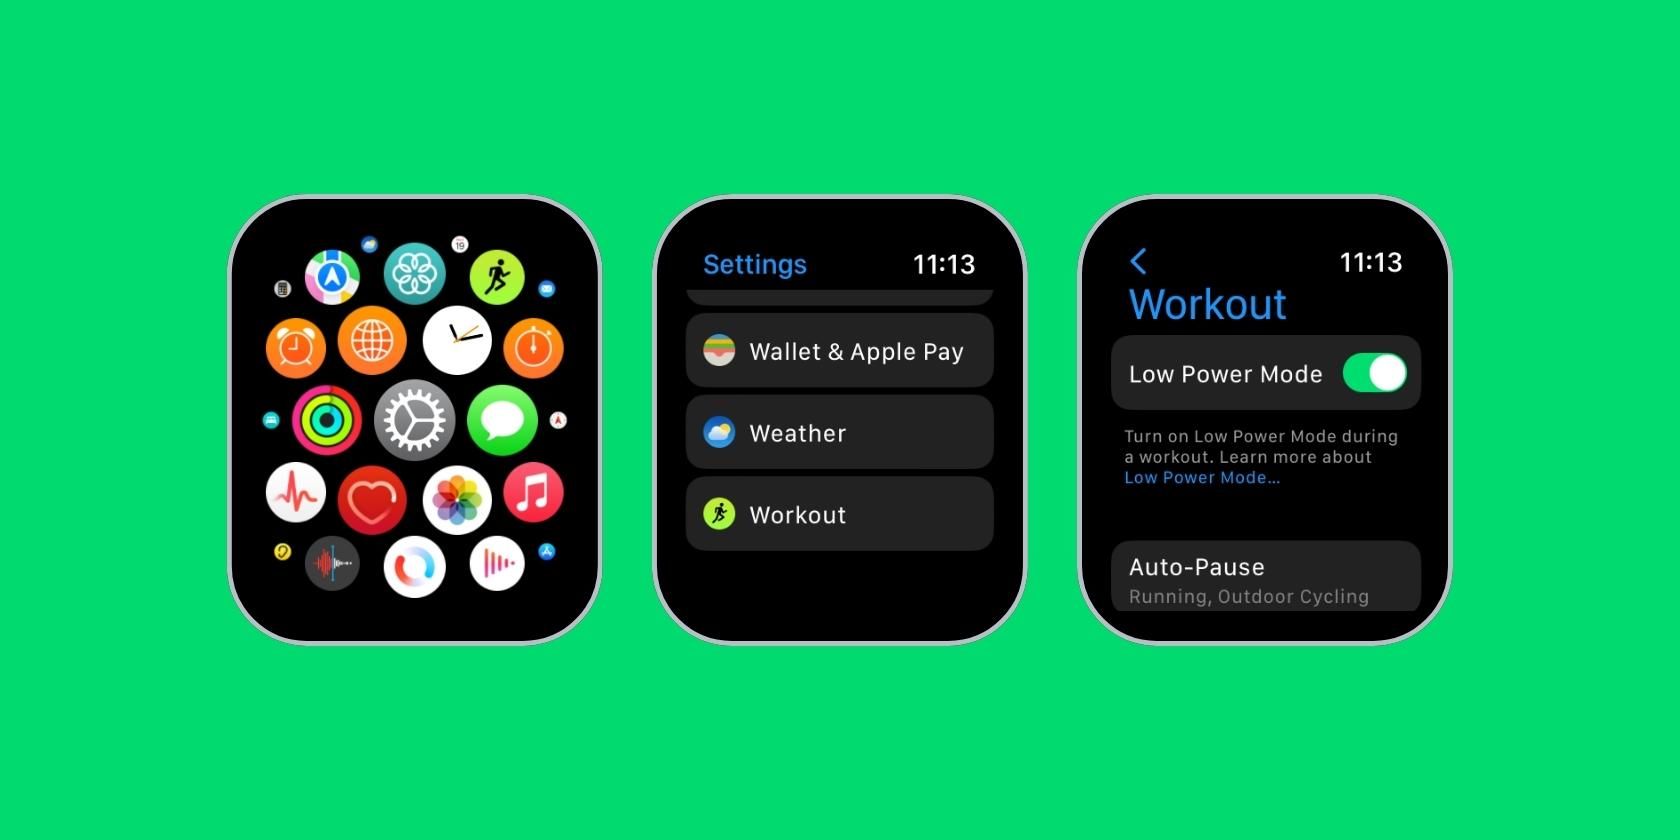 image showing how to enable Low Power Mode automatically during Workouts on Apple Watch